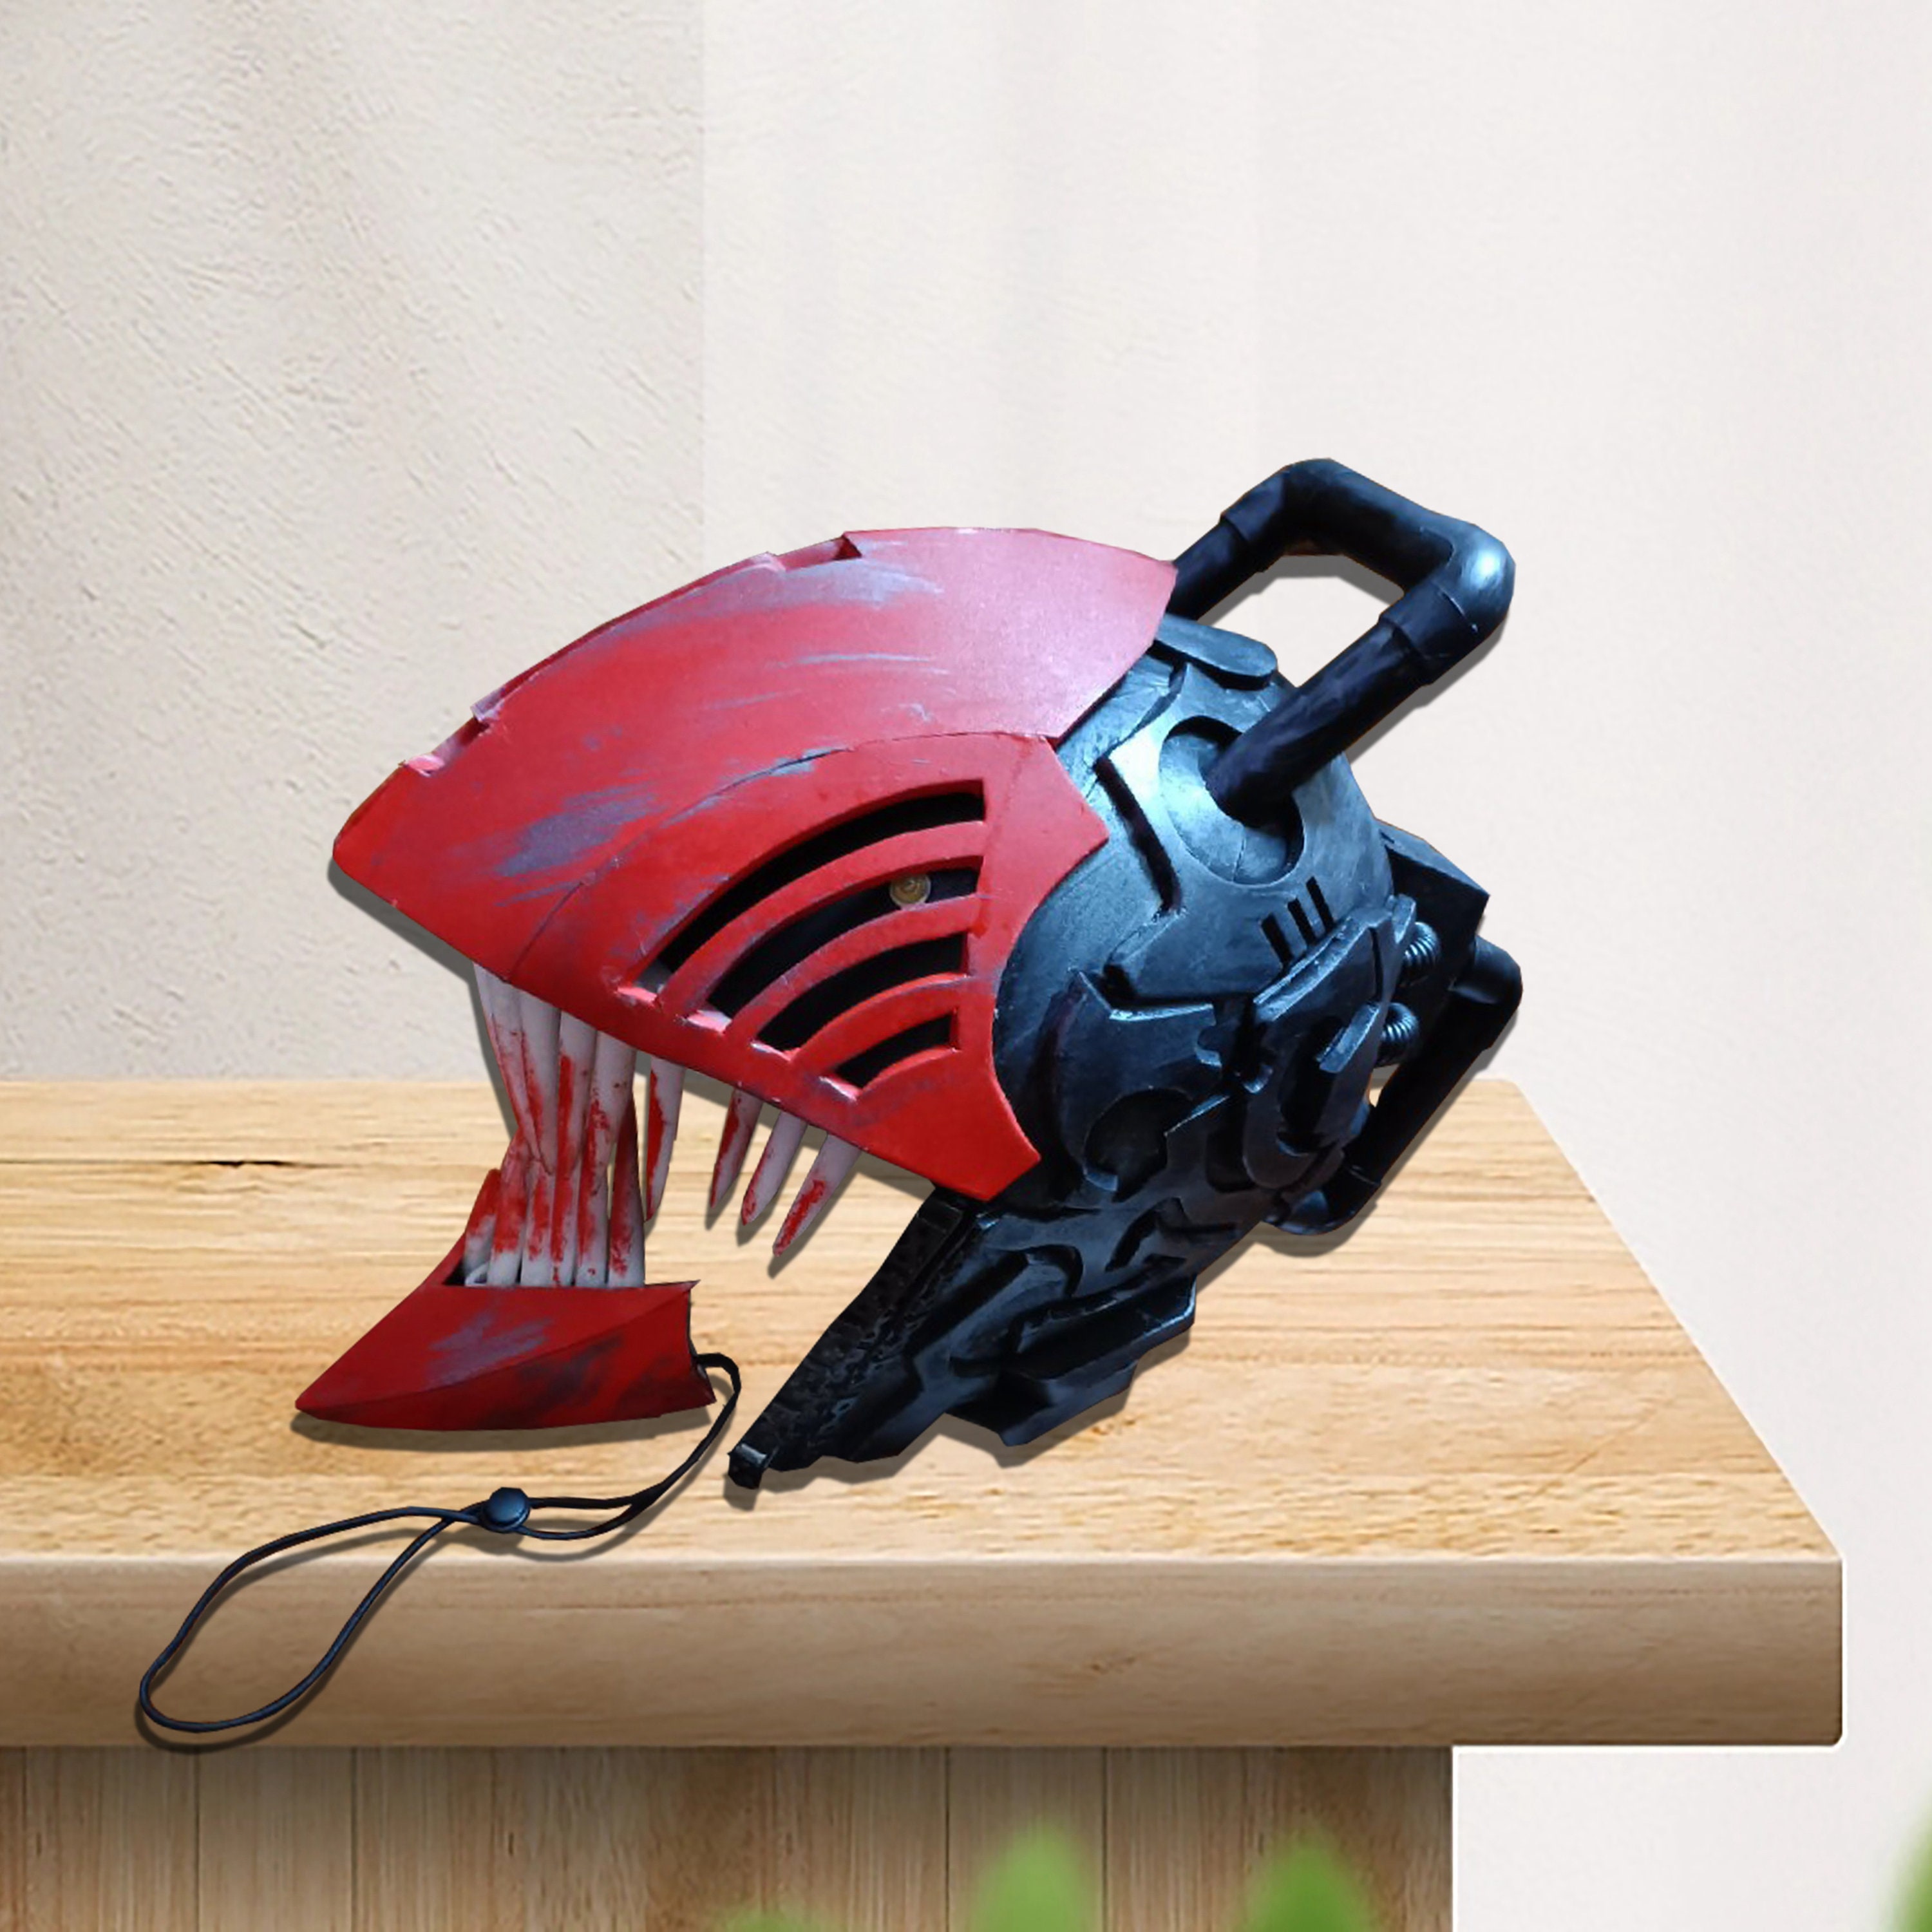 3D Printed Chainsaw Man Helmet Denji Cosplay for Sale – Go2Cosplay